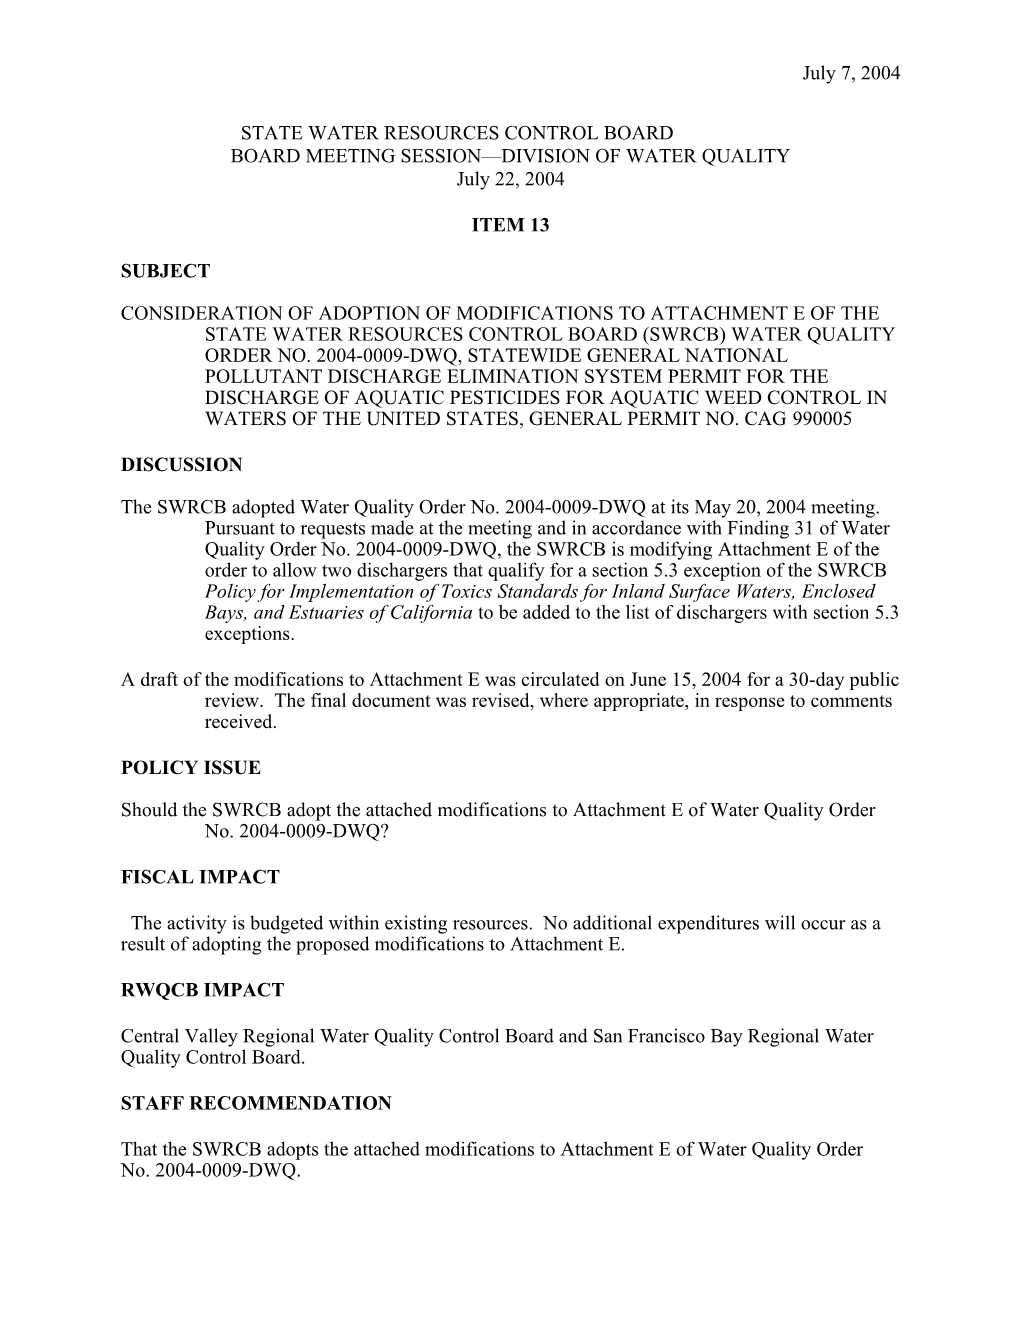 State Water Resources Control Board s47